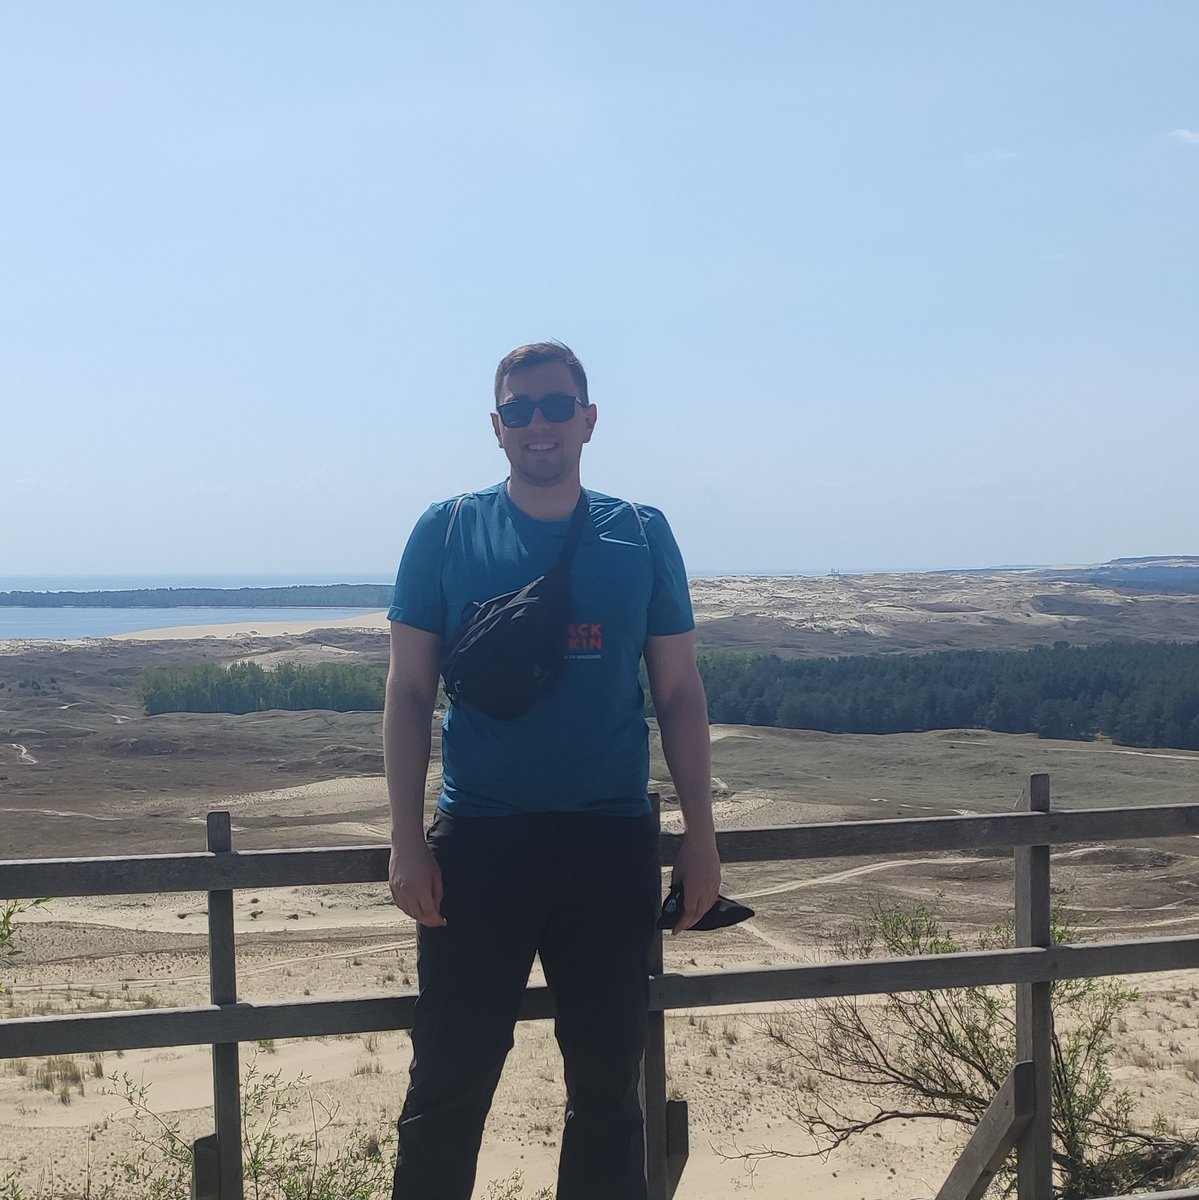 Curonian Spit - 8th stop

The Curonian Spit National Park starts right across Klaipeda. It is a big sand dune which has overgrown with trees & grass. Nida is the mai. Town and located close to the Kaliningrad border. Also great for a bike trip (which I did)

#CuronianSpit #Nida